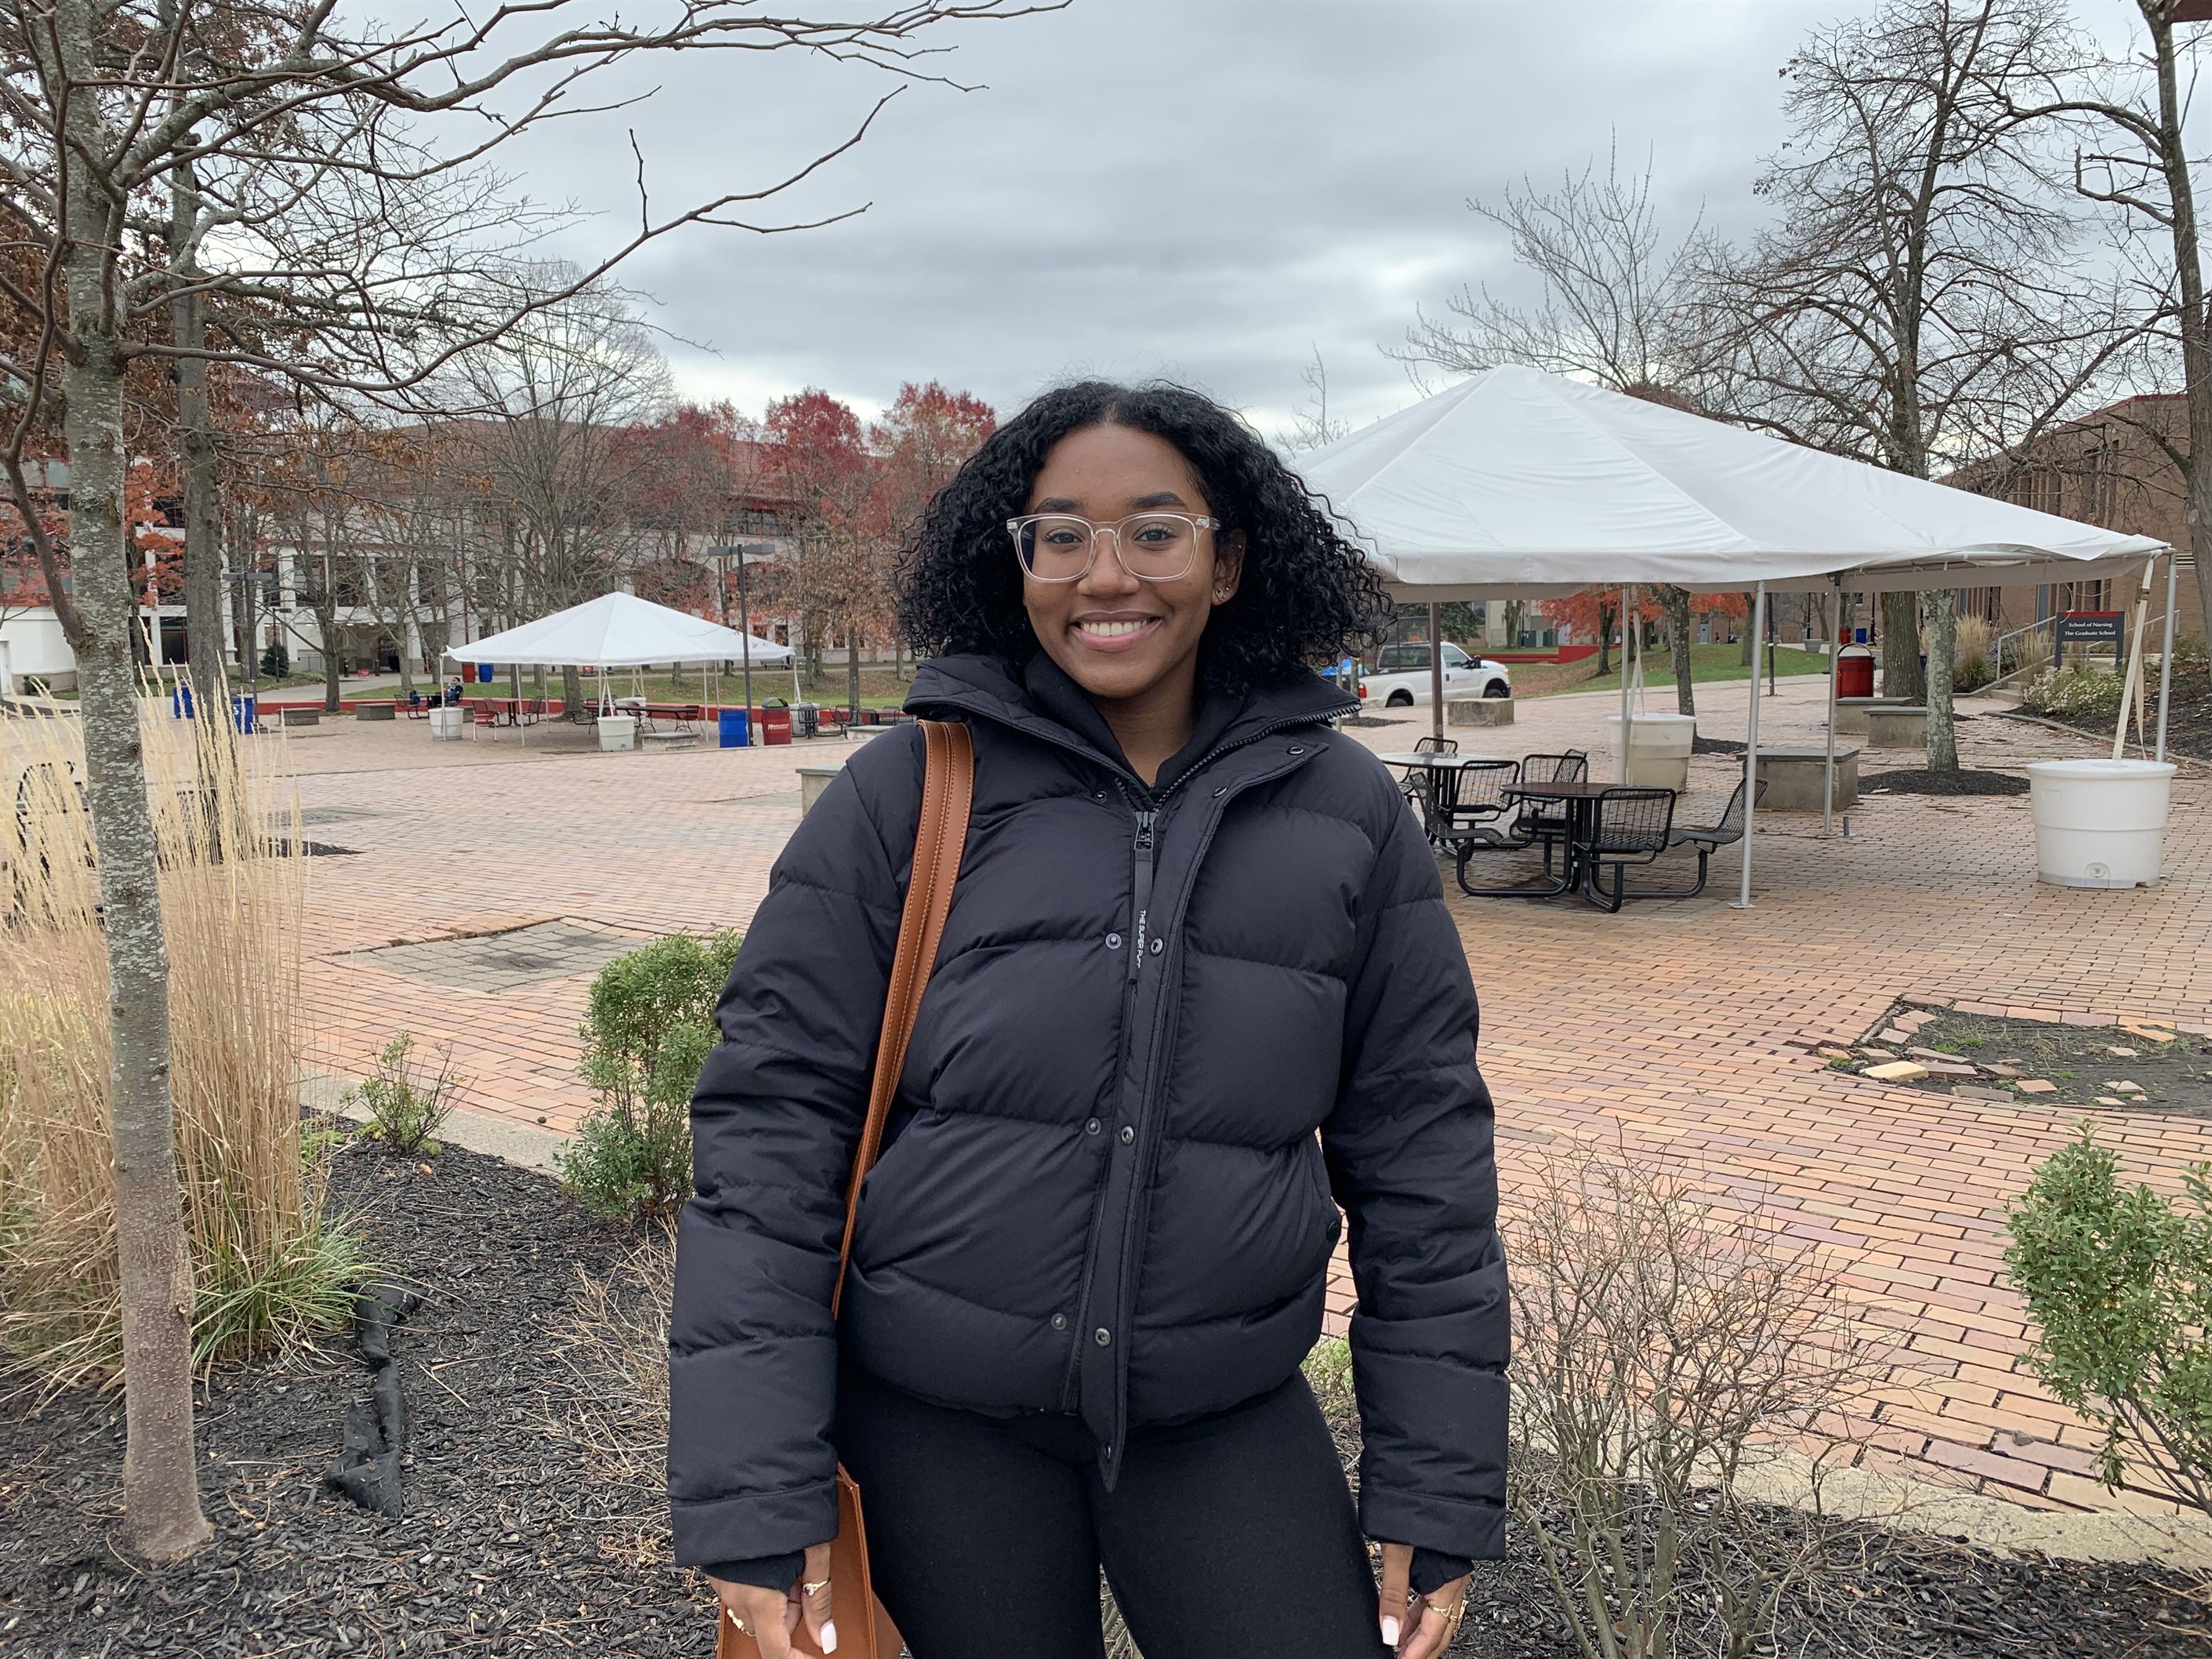 Shairy Mejia, a freshman business marketing major, said the adjustment benefits students with having an earlier winter break. Aidan Ivers | The Montclarion